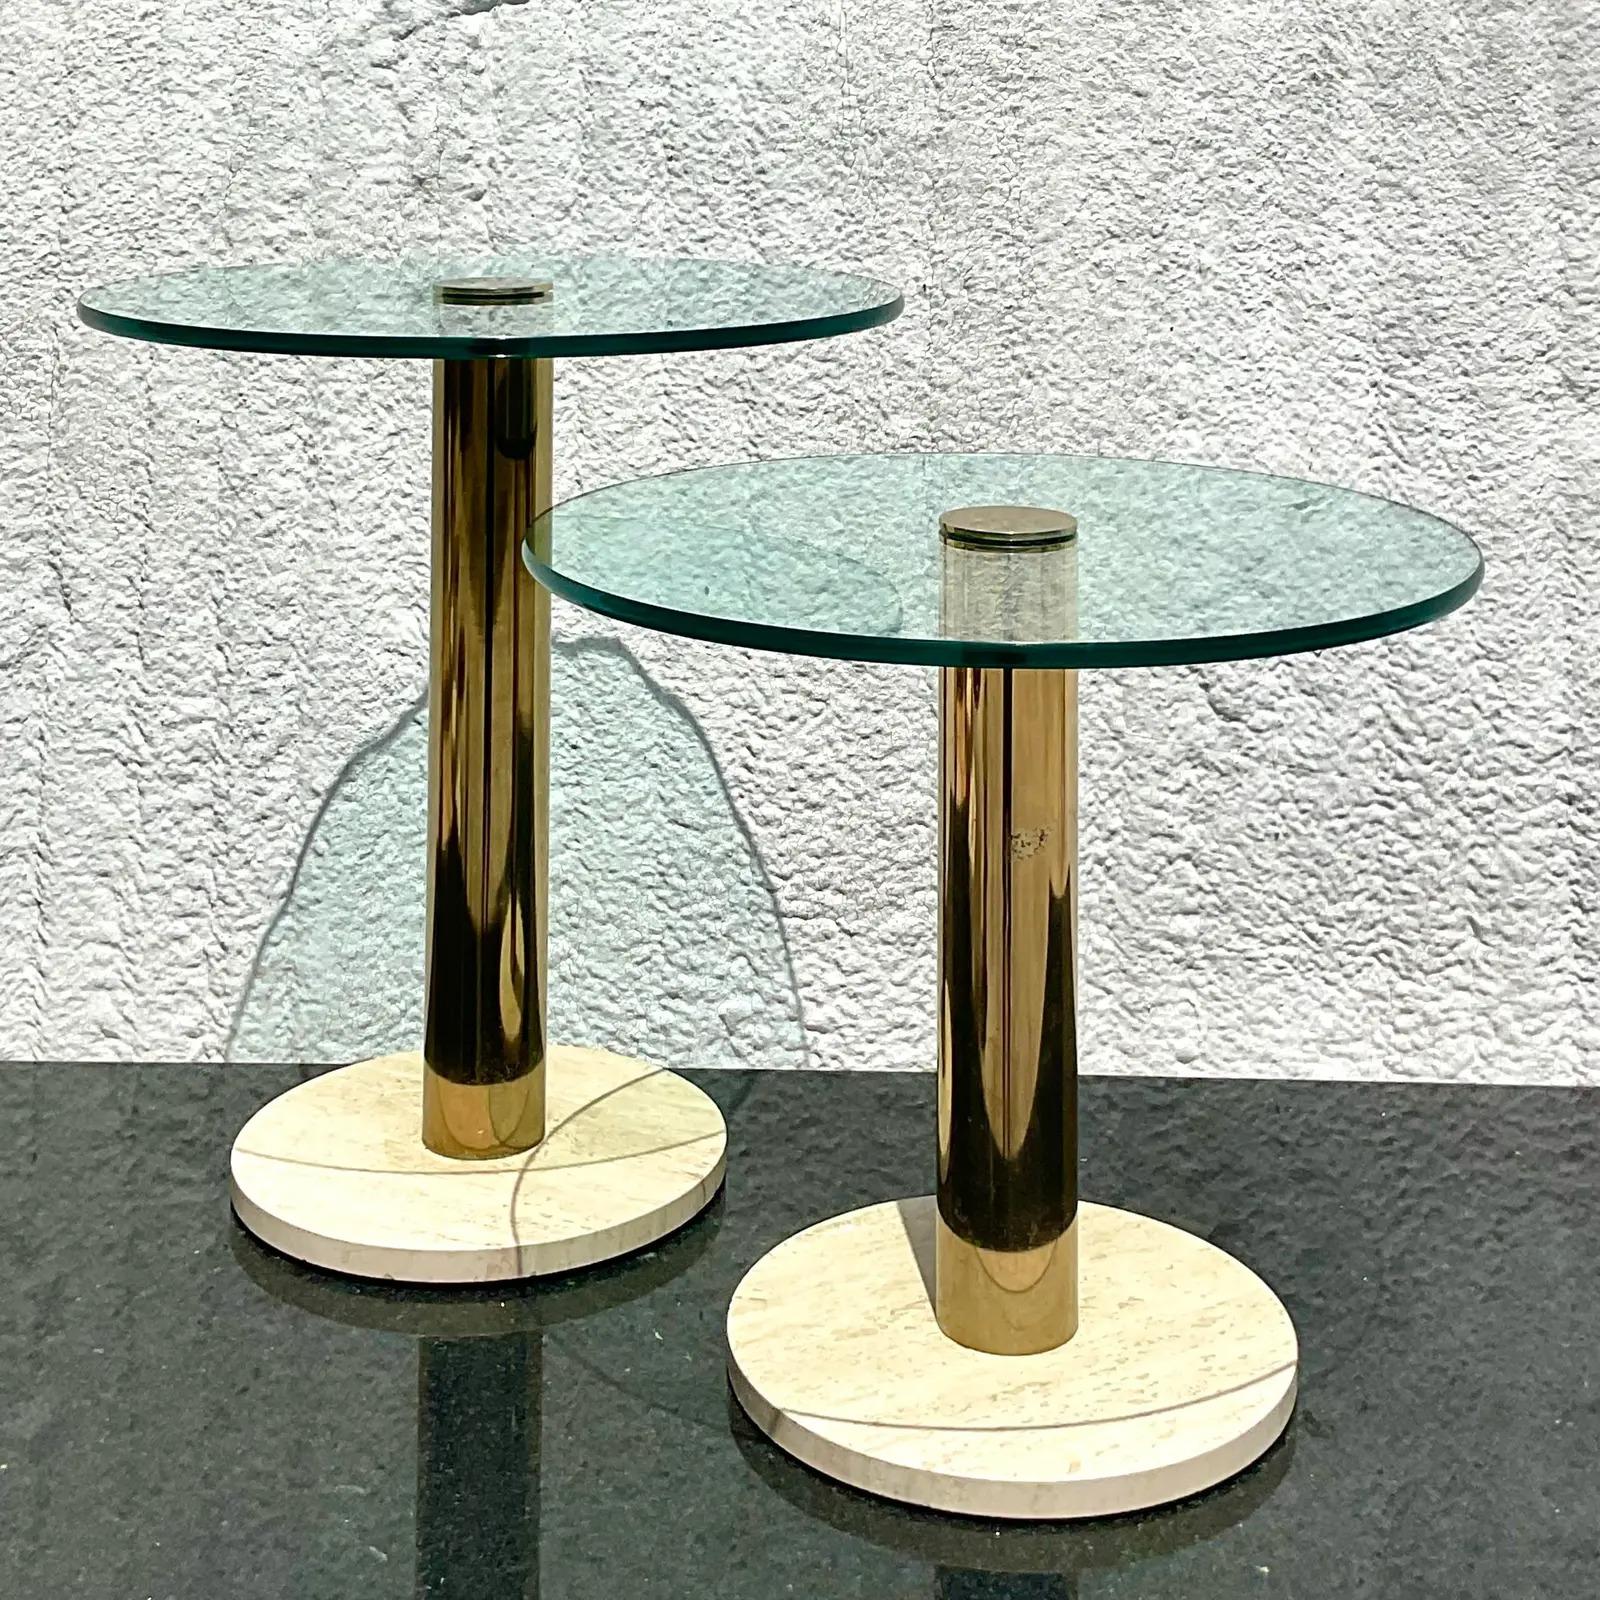 A chic pair of vintage Contemporary drinks table. Made by the iconic Pace Collection. Beautiful marble bases with brass pedestals and glass tops. Acquired from a Palm Beach estate.